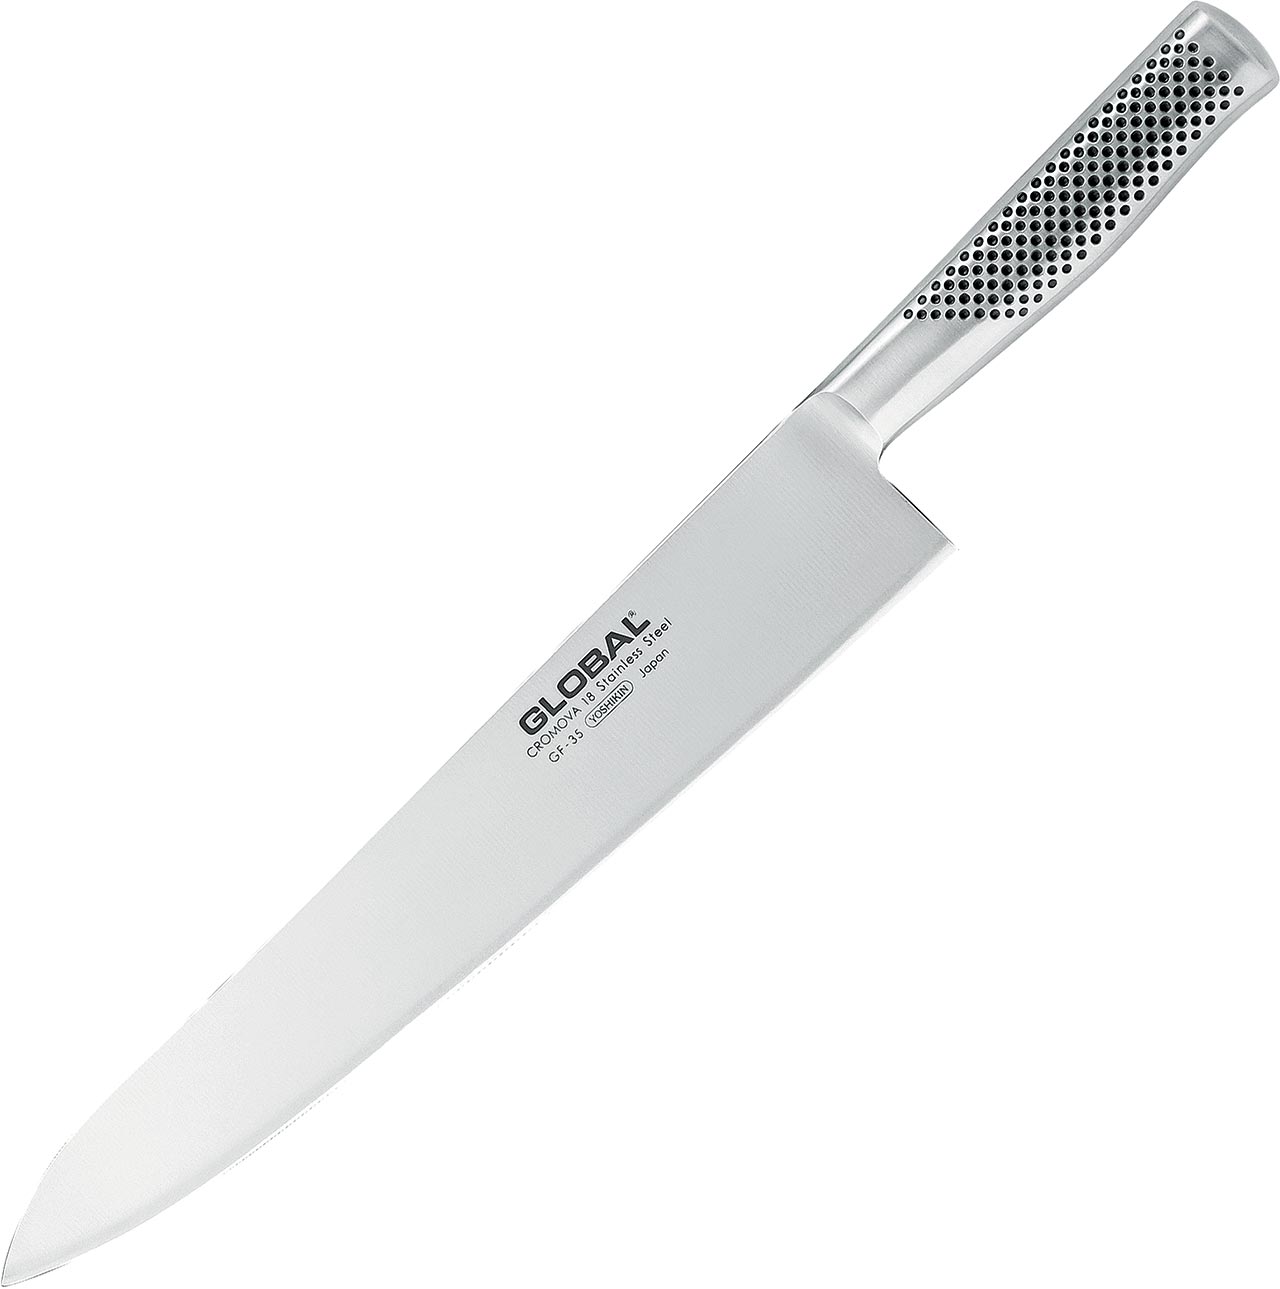 Global Forged Chef's Knife GF-33